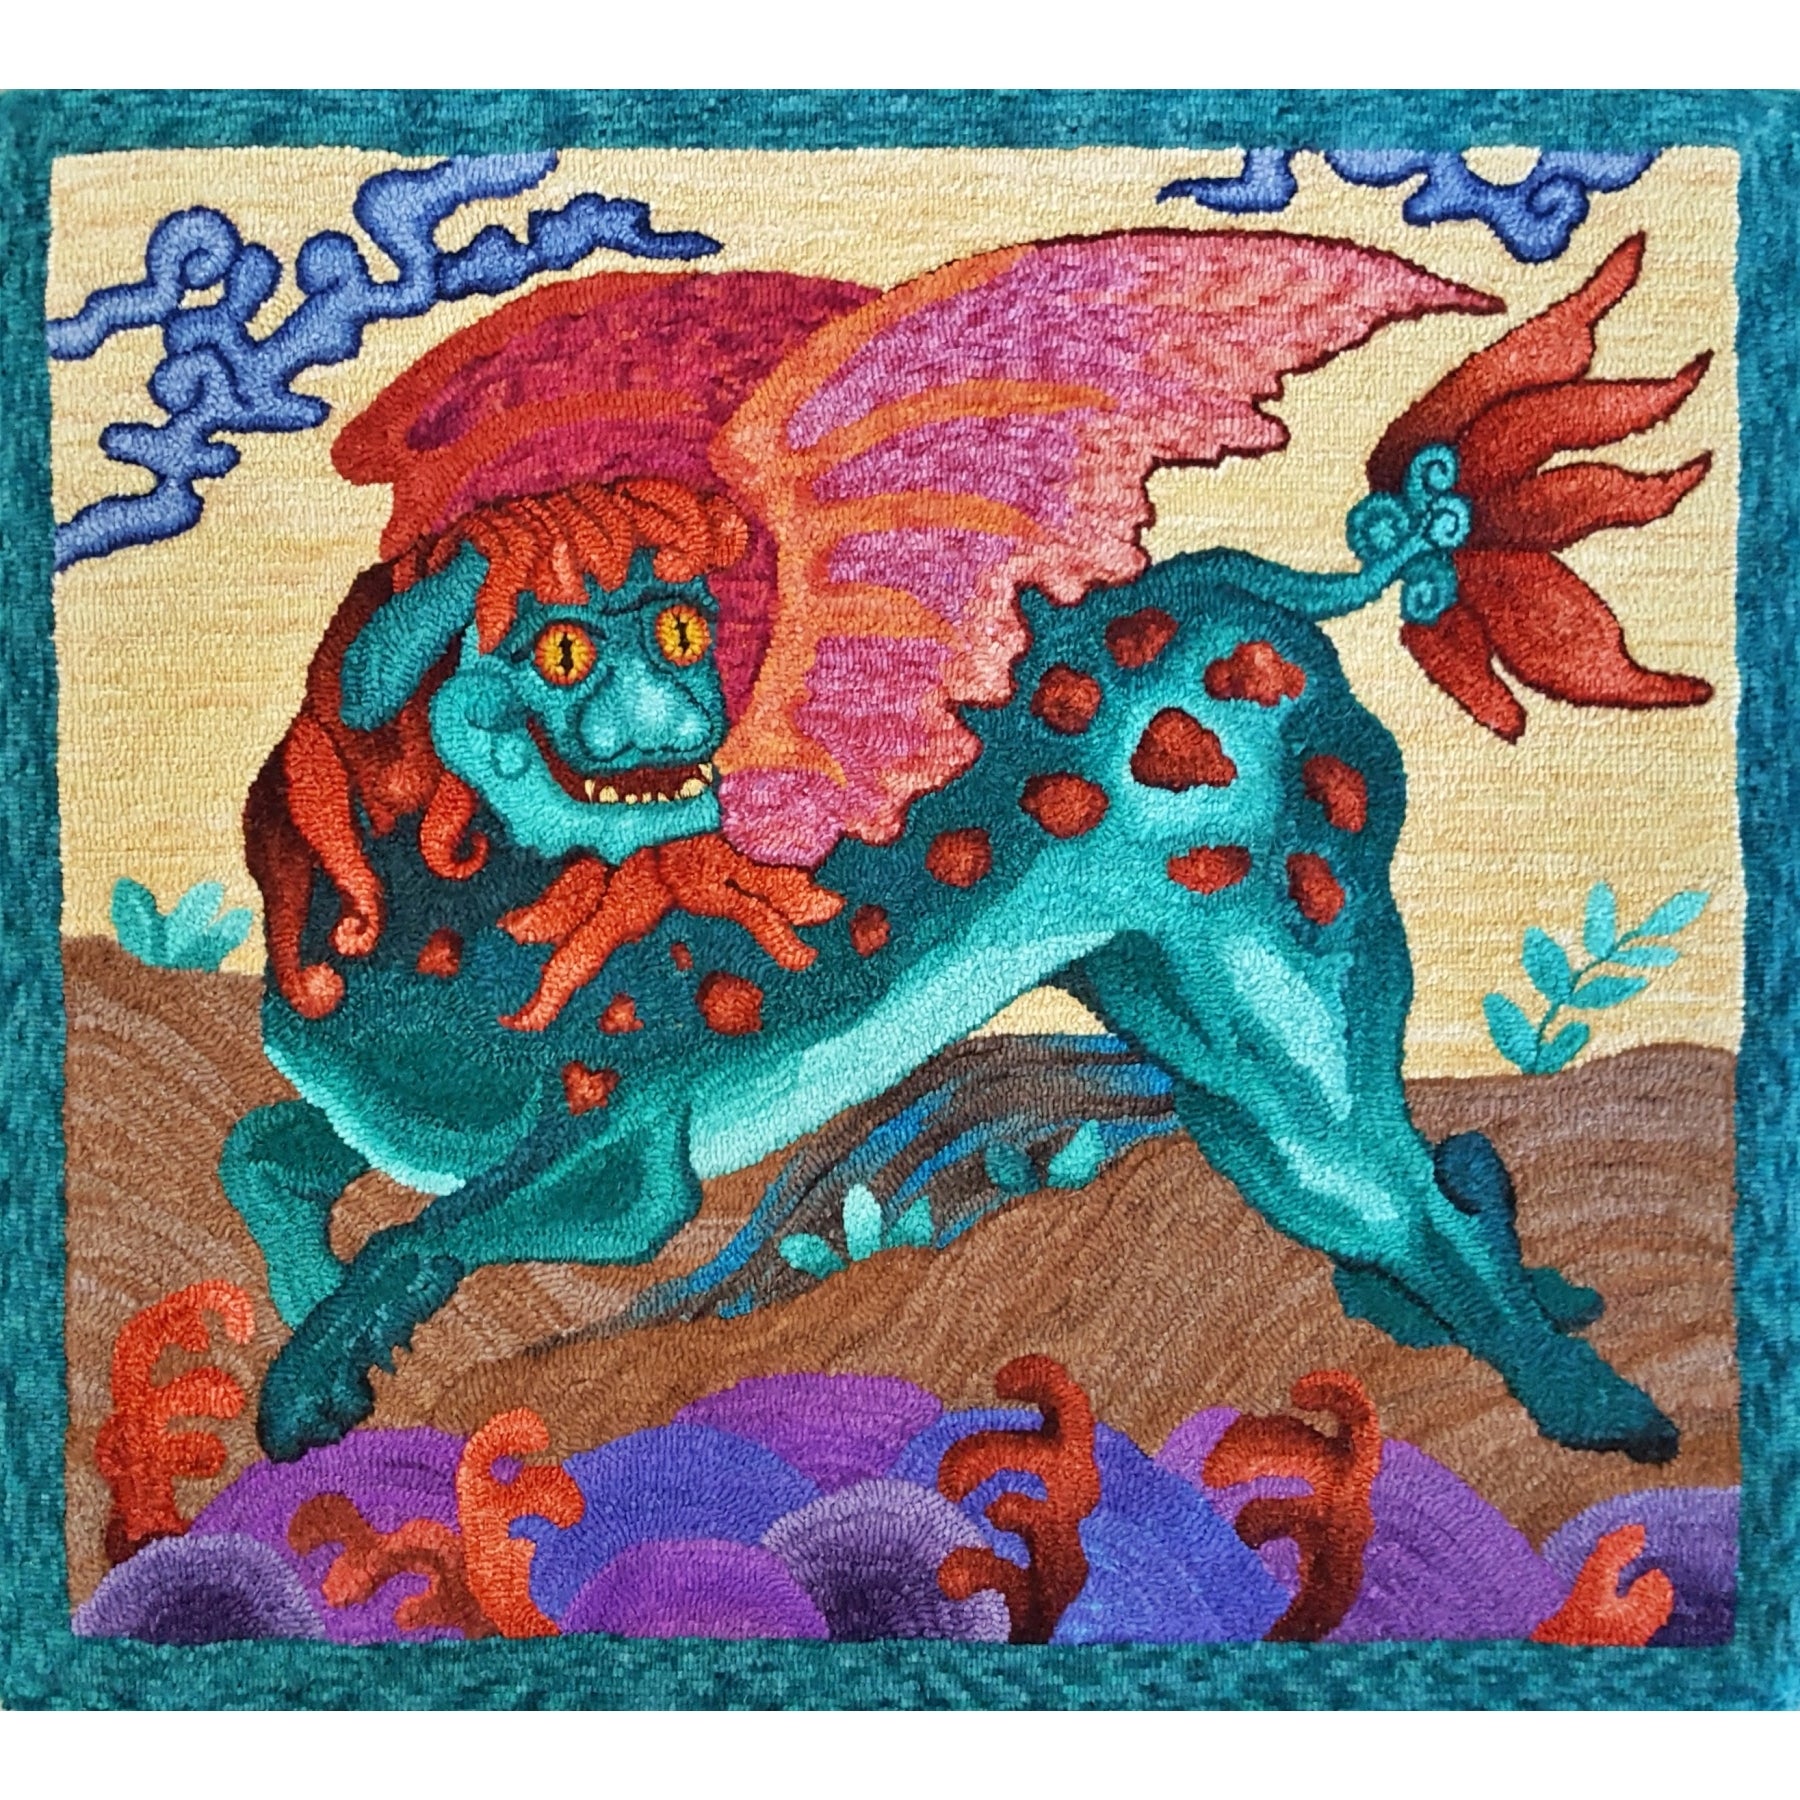 Winged Lion, rug hooked by Terryl Ostmo